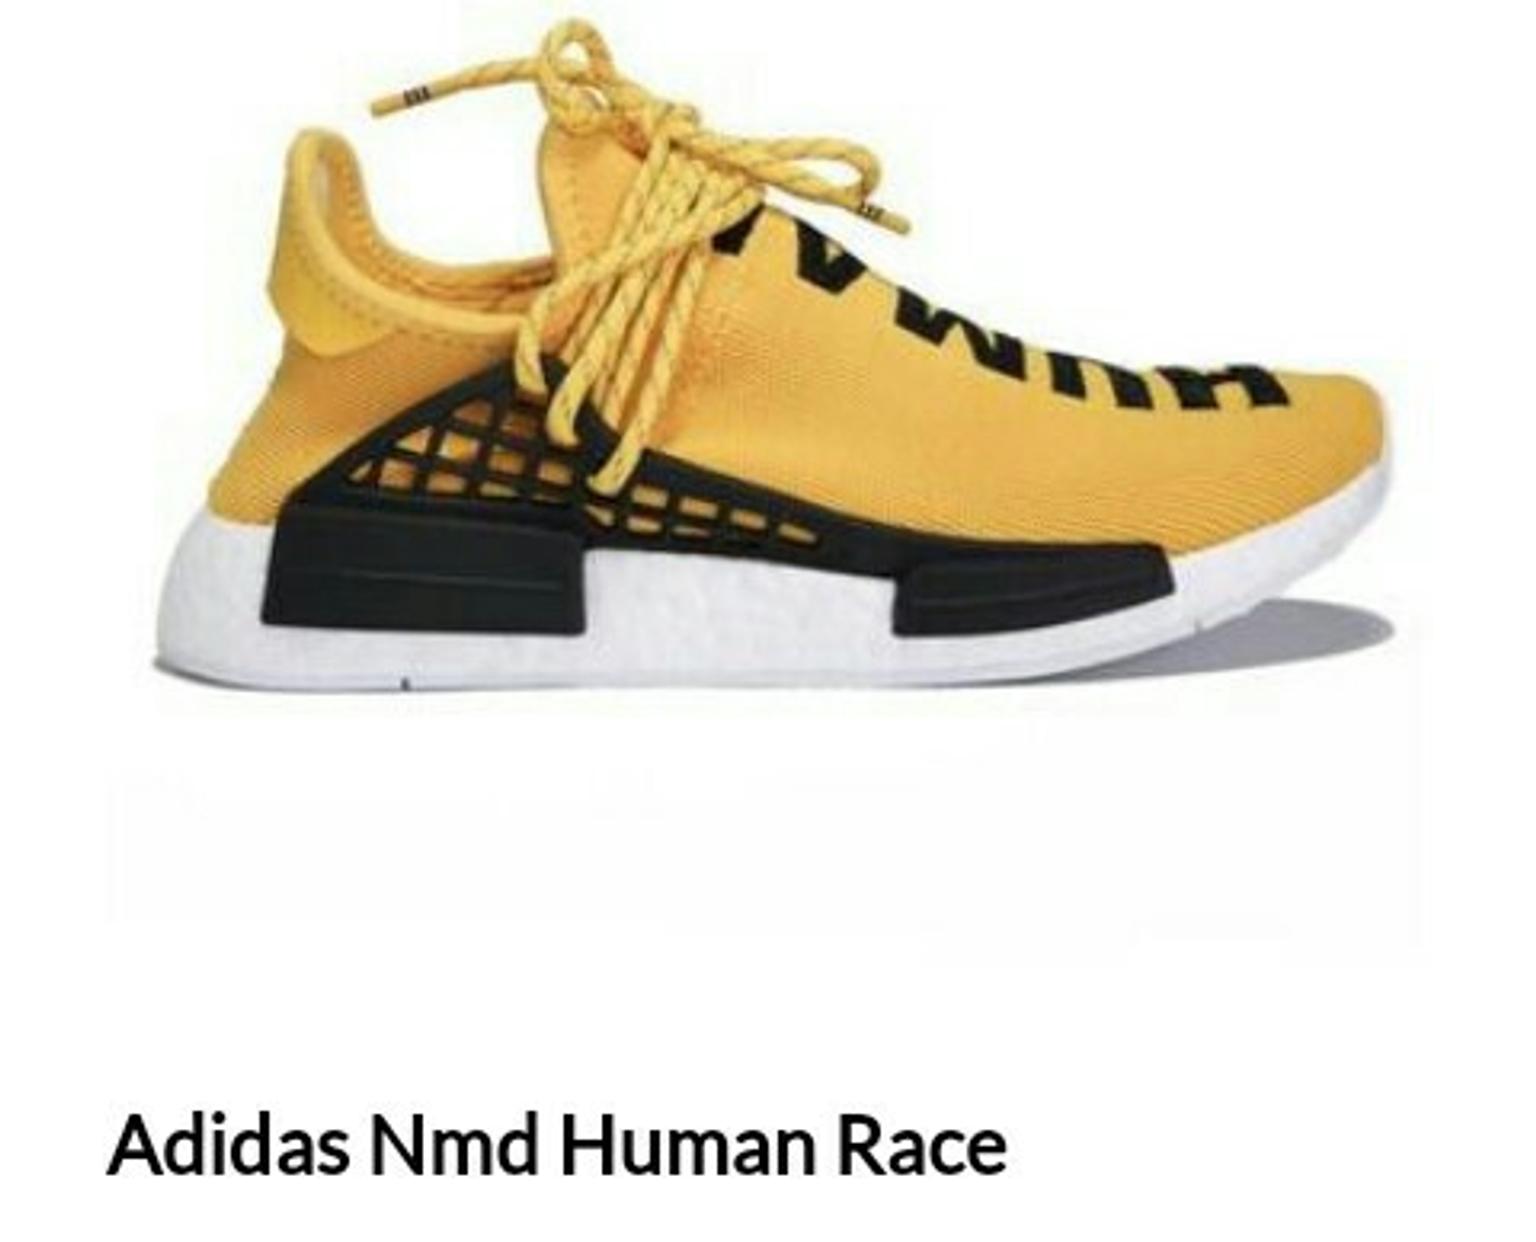 SCARPE ADIDAS NMD HUMAN RACE ORIGINALI in 20157 Milano for €90.00 for sale  | Shpock